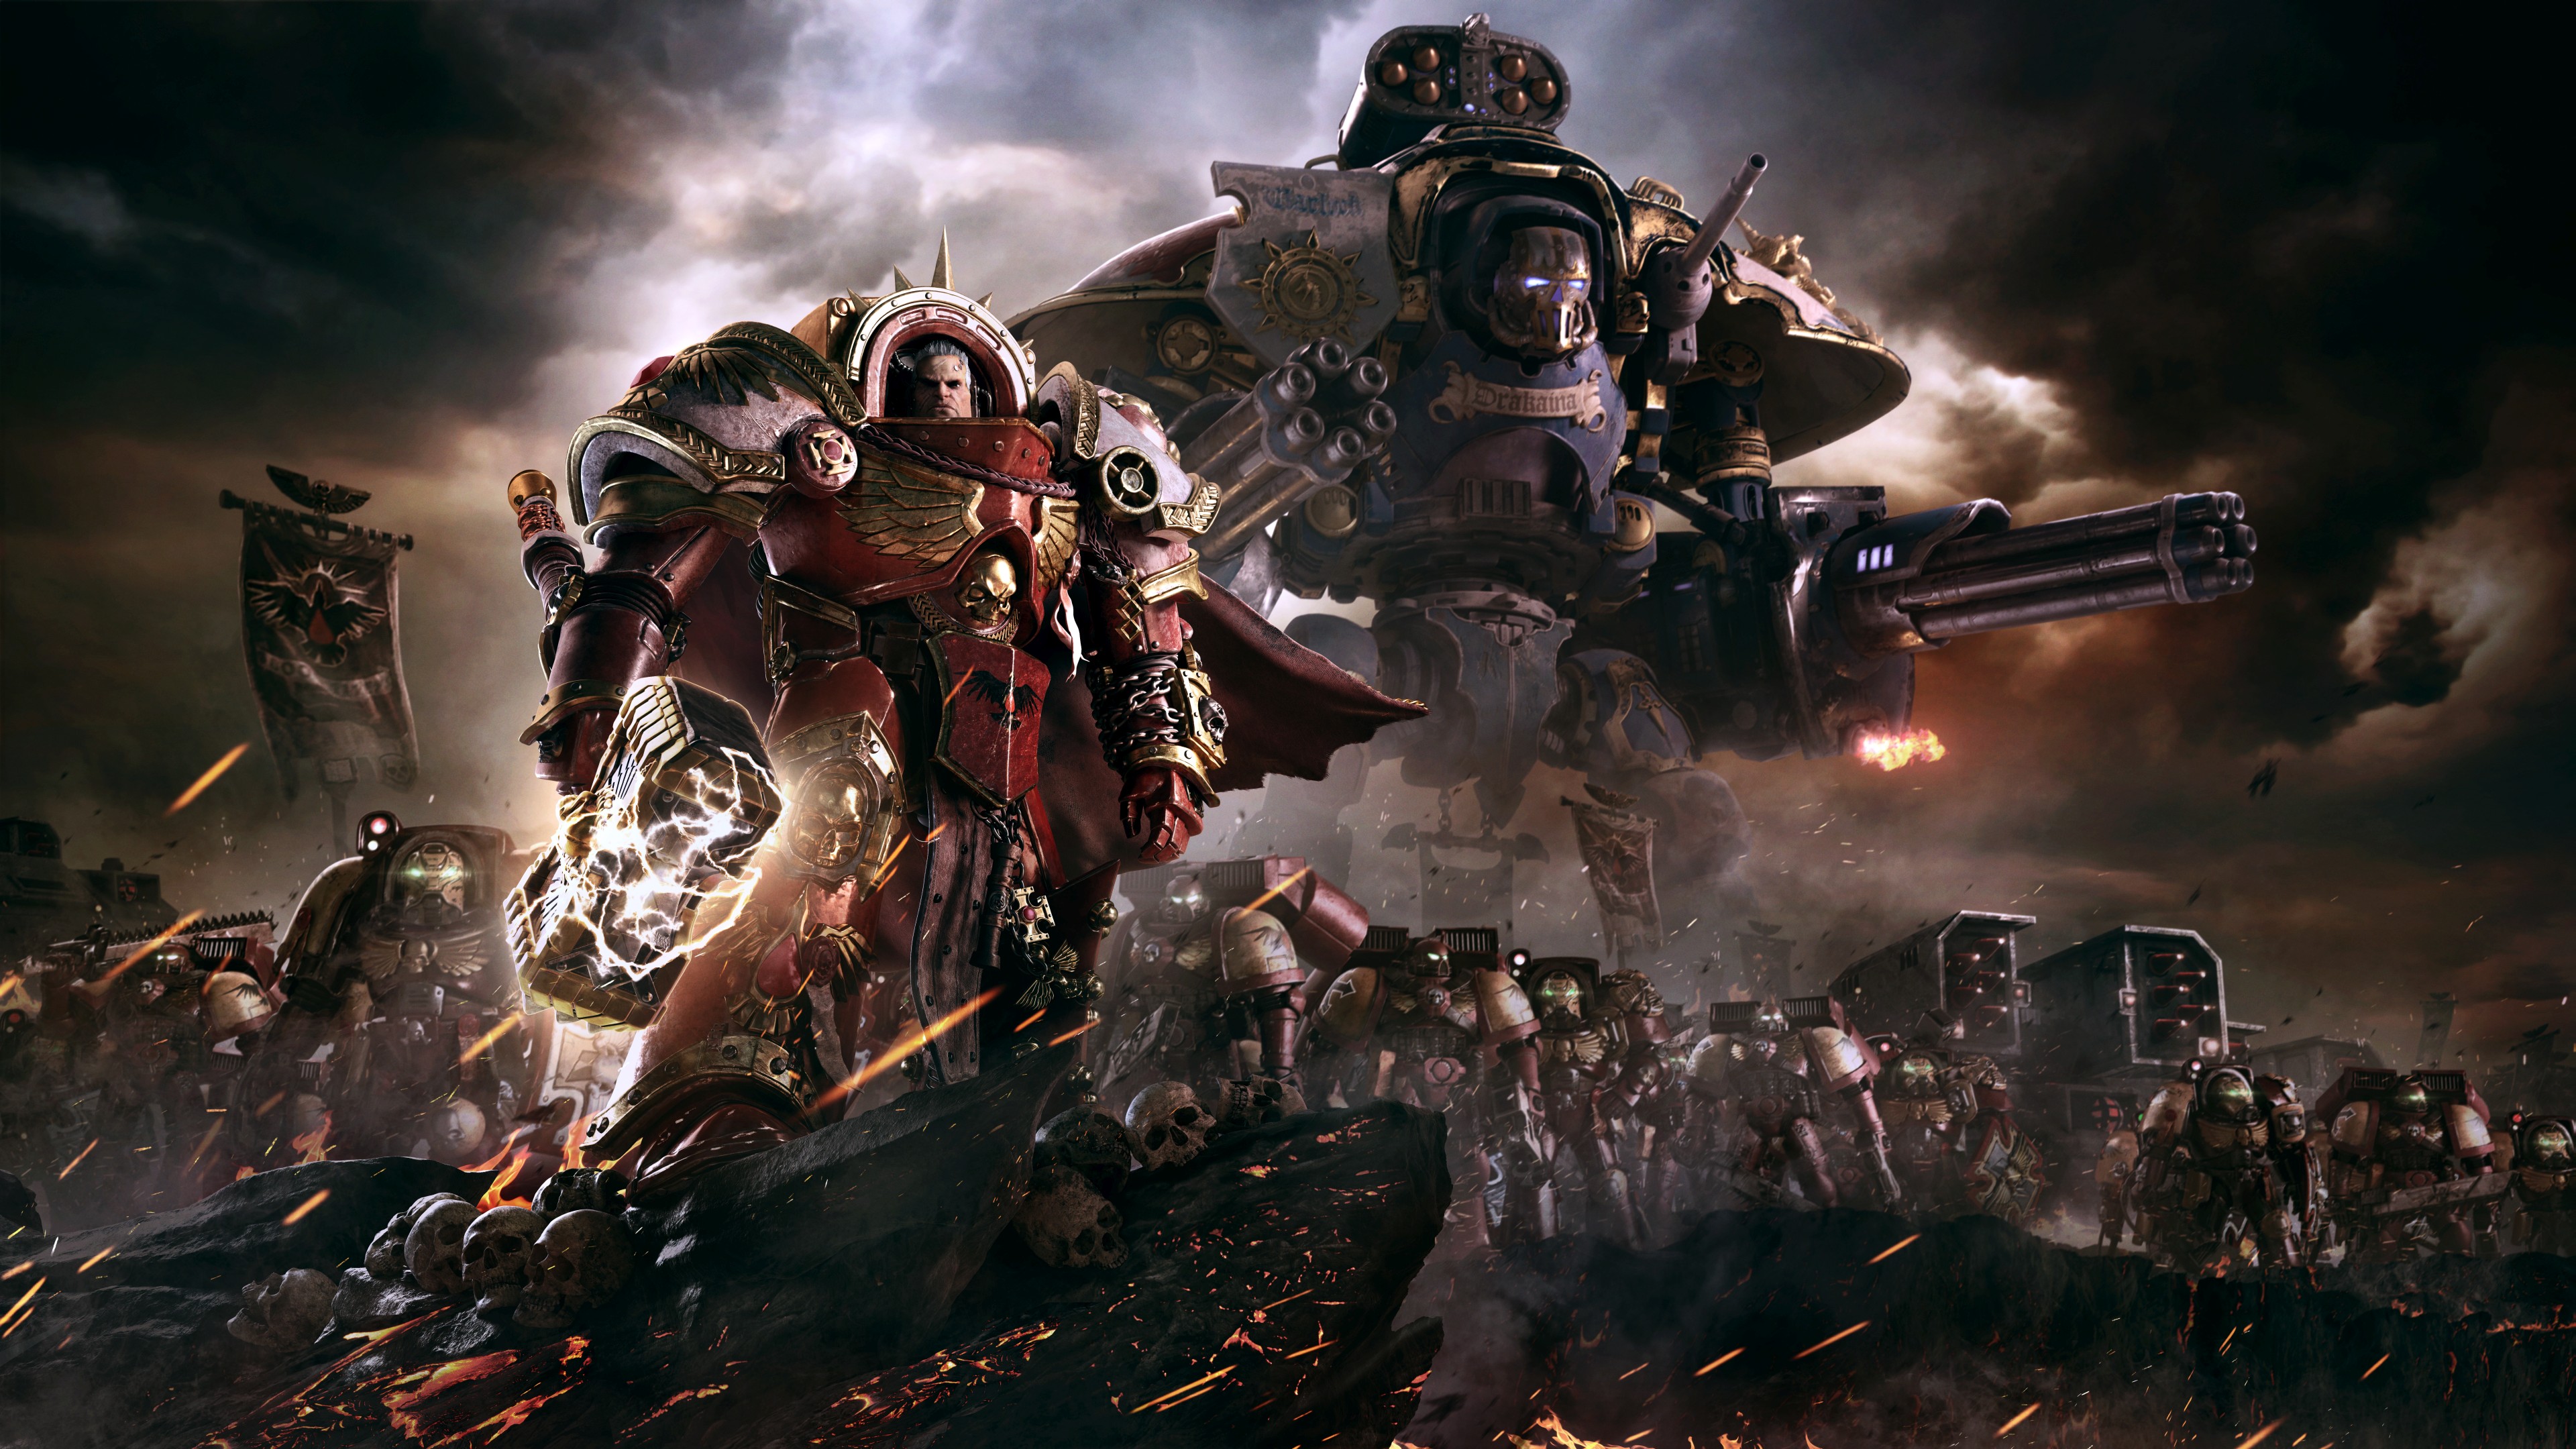 Amazing Warhammer 40,000: Dawn Of War III Pictures & Backgrounds